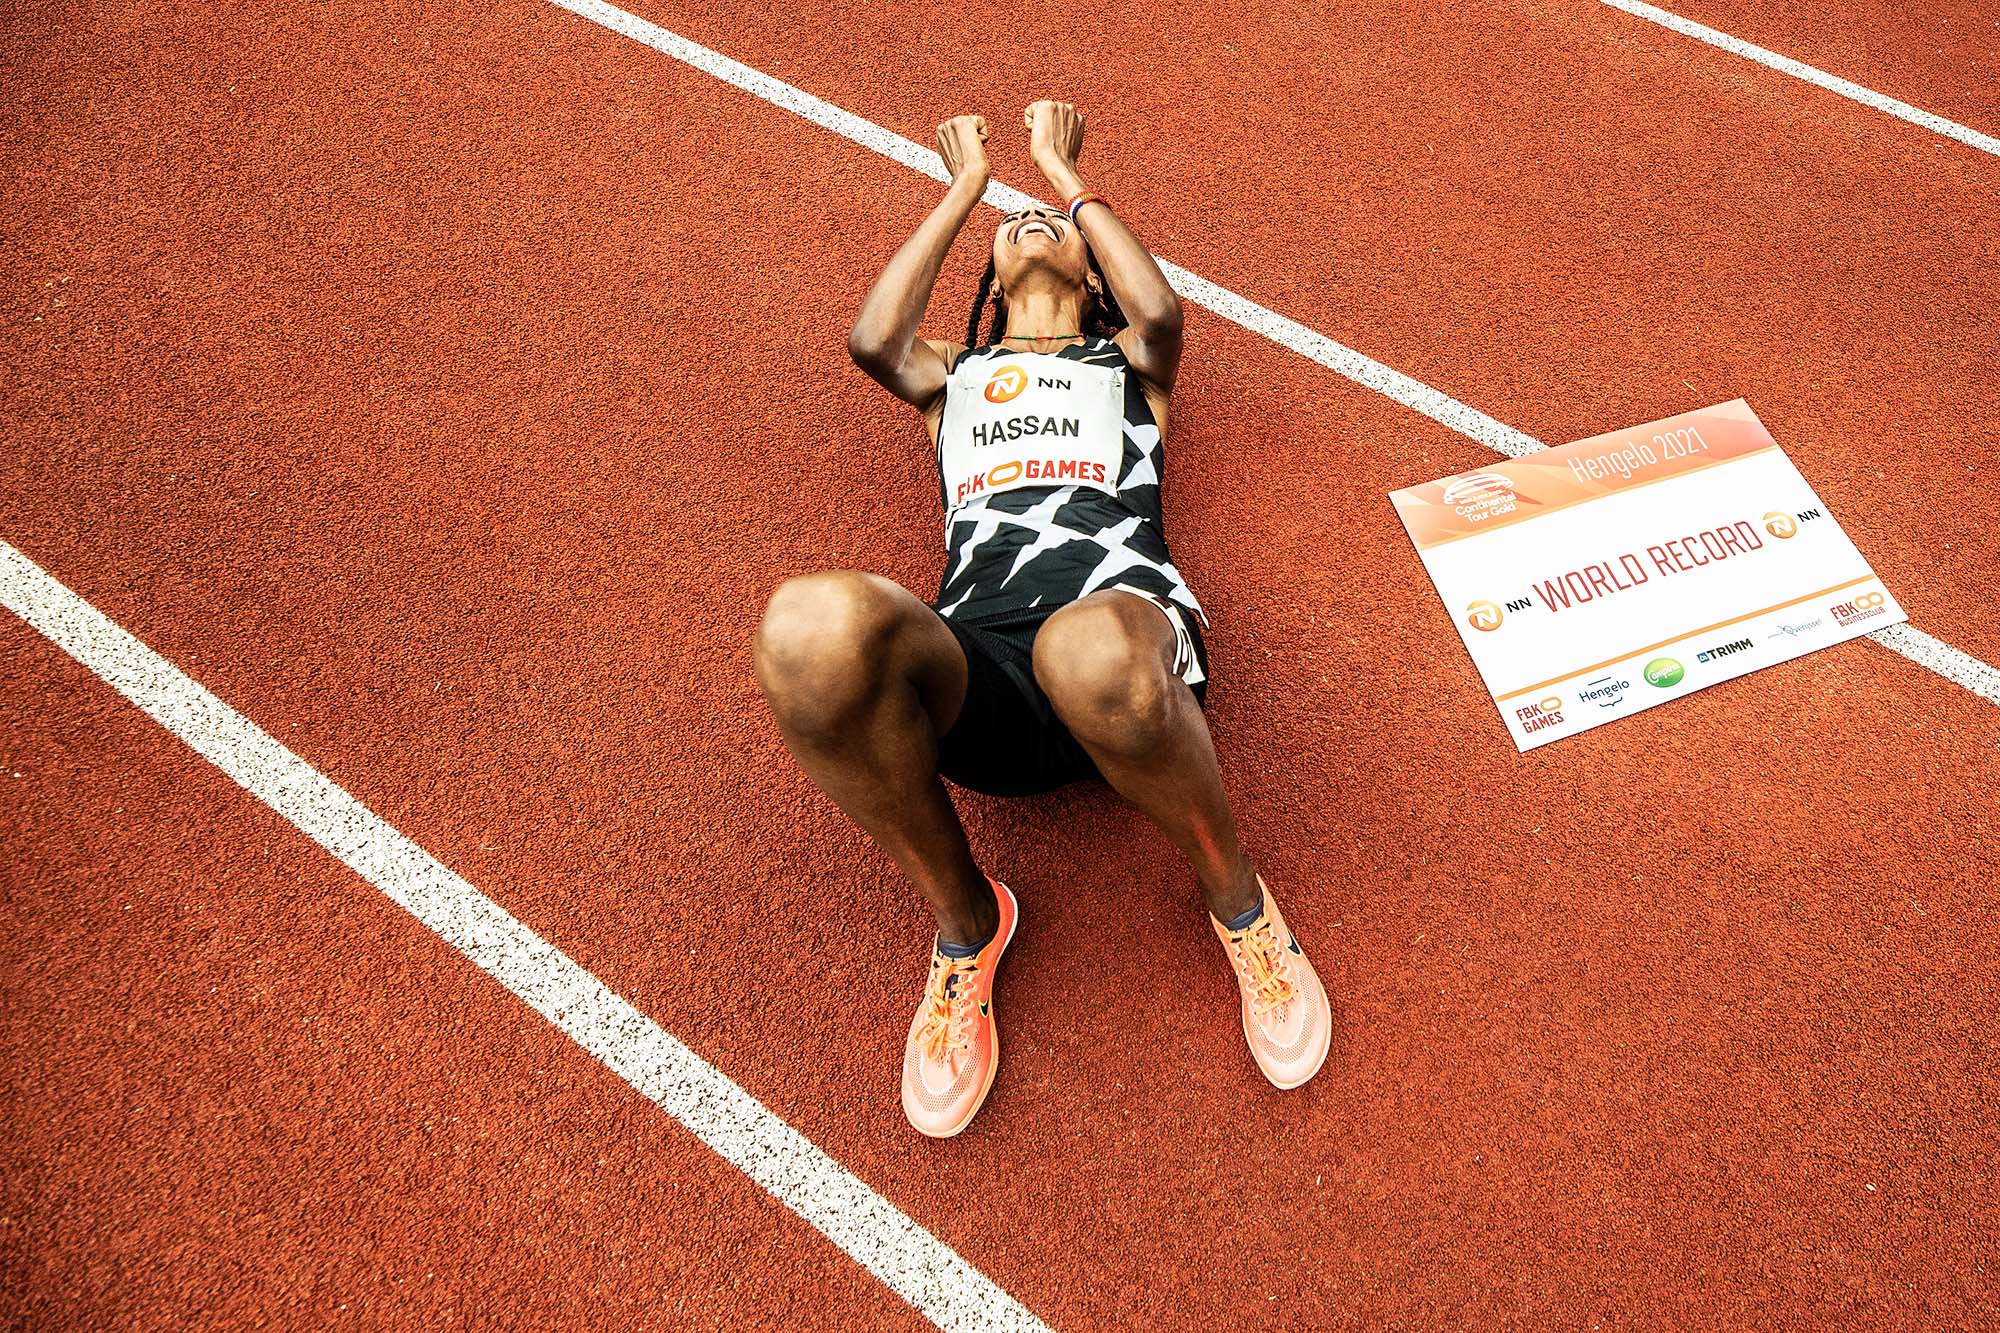 Sifan Hassan lies on the ground after winning at the FBK Games